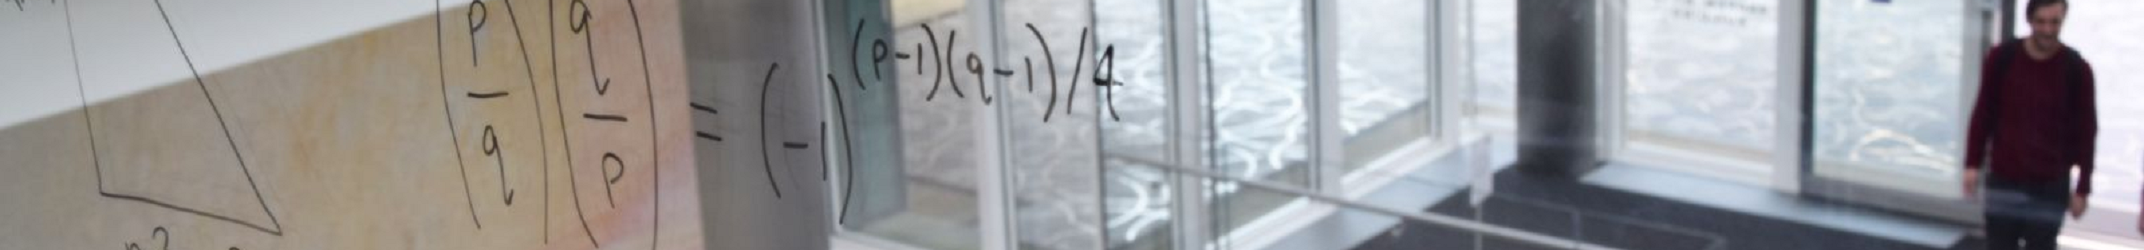 Maths (the law of quadratic reciprocity) written on a window in the Mathematical Institute, with the Penrose tiles in the background.